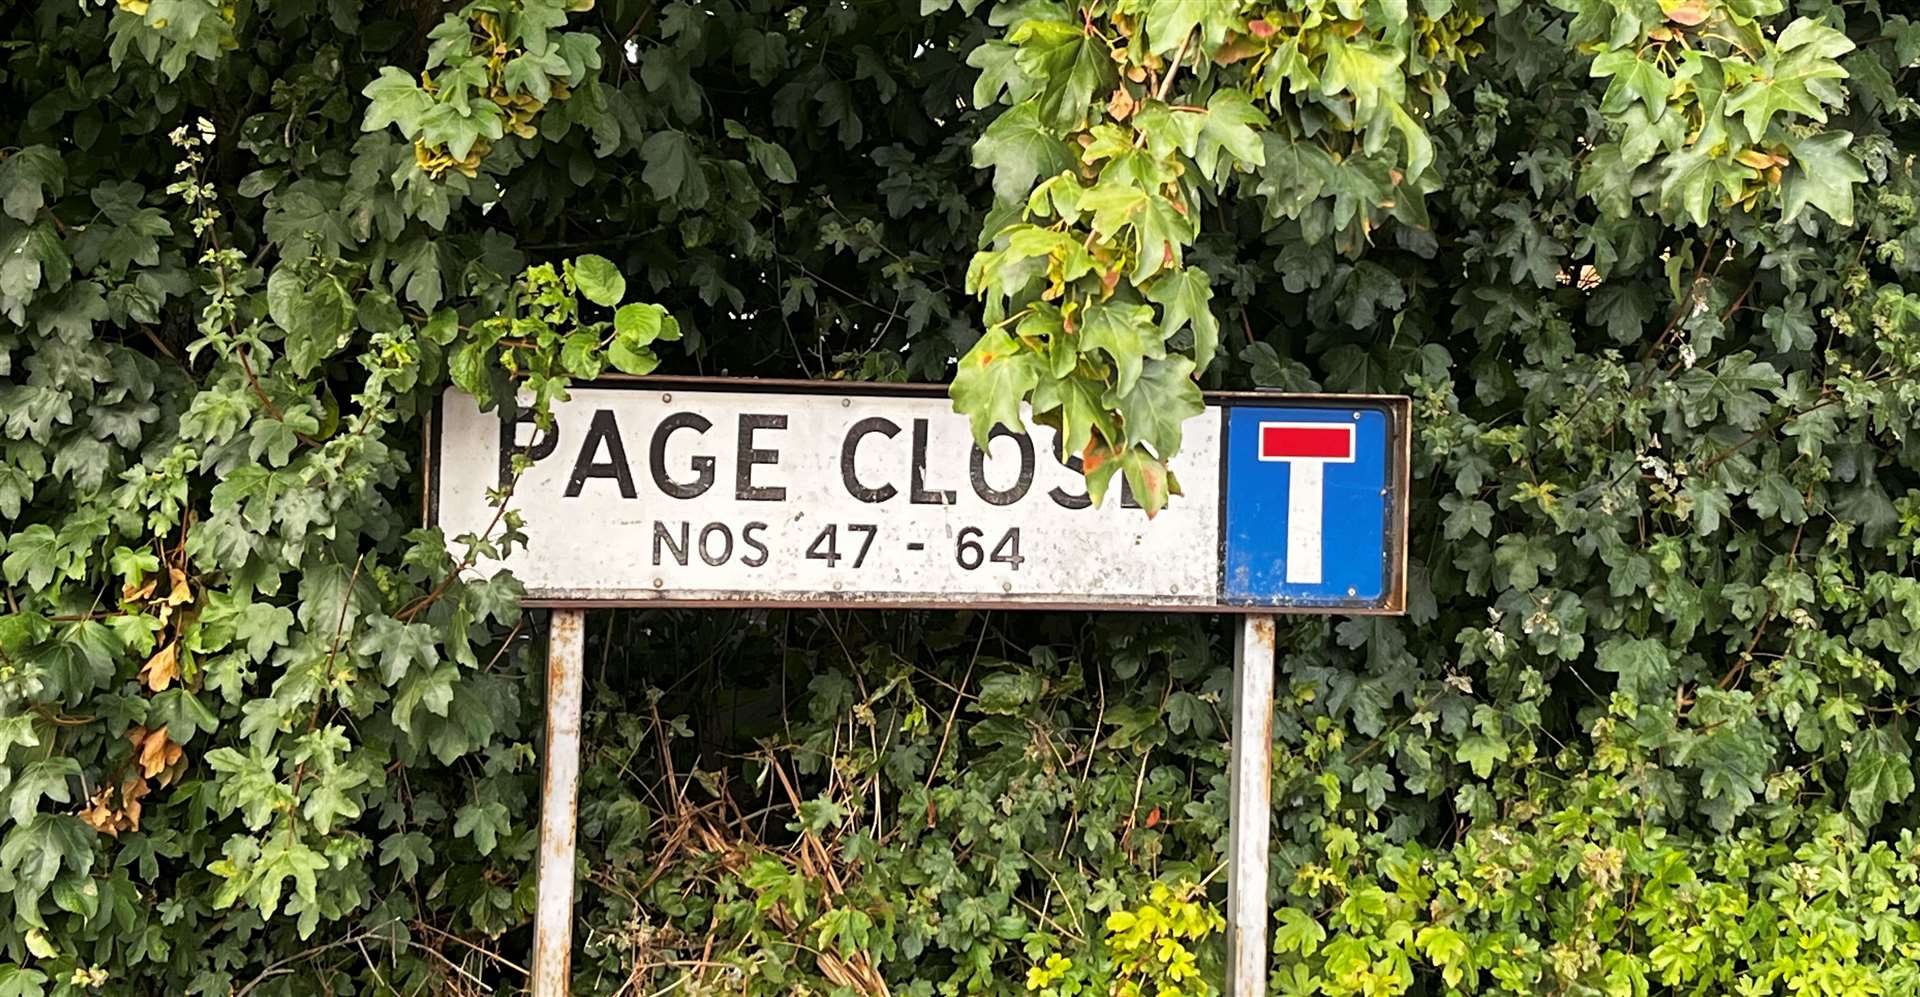 Film crews were back filming in Page Close in Bean